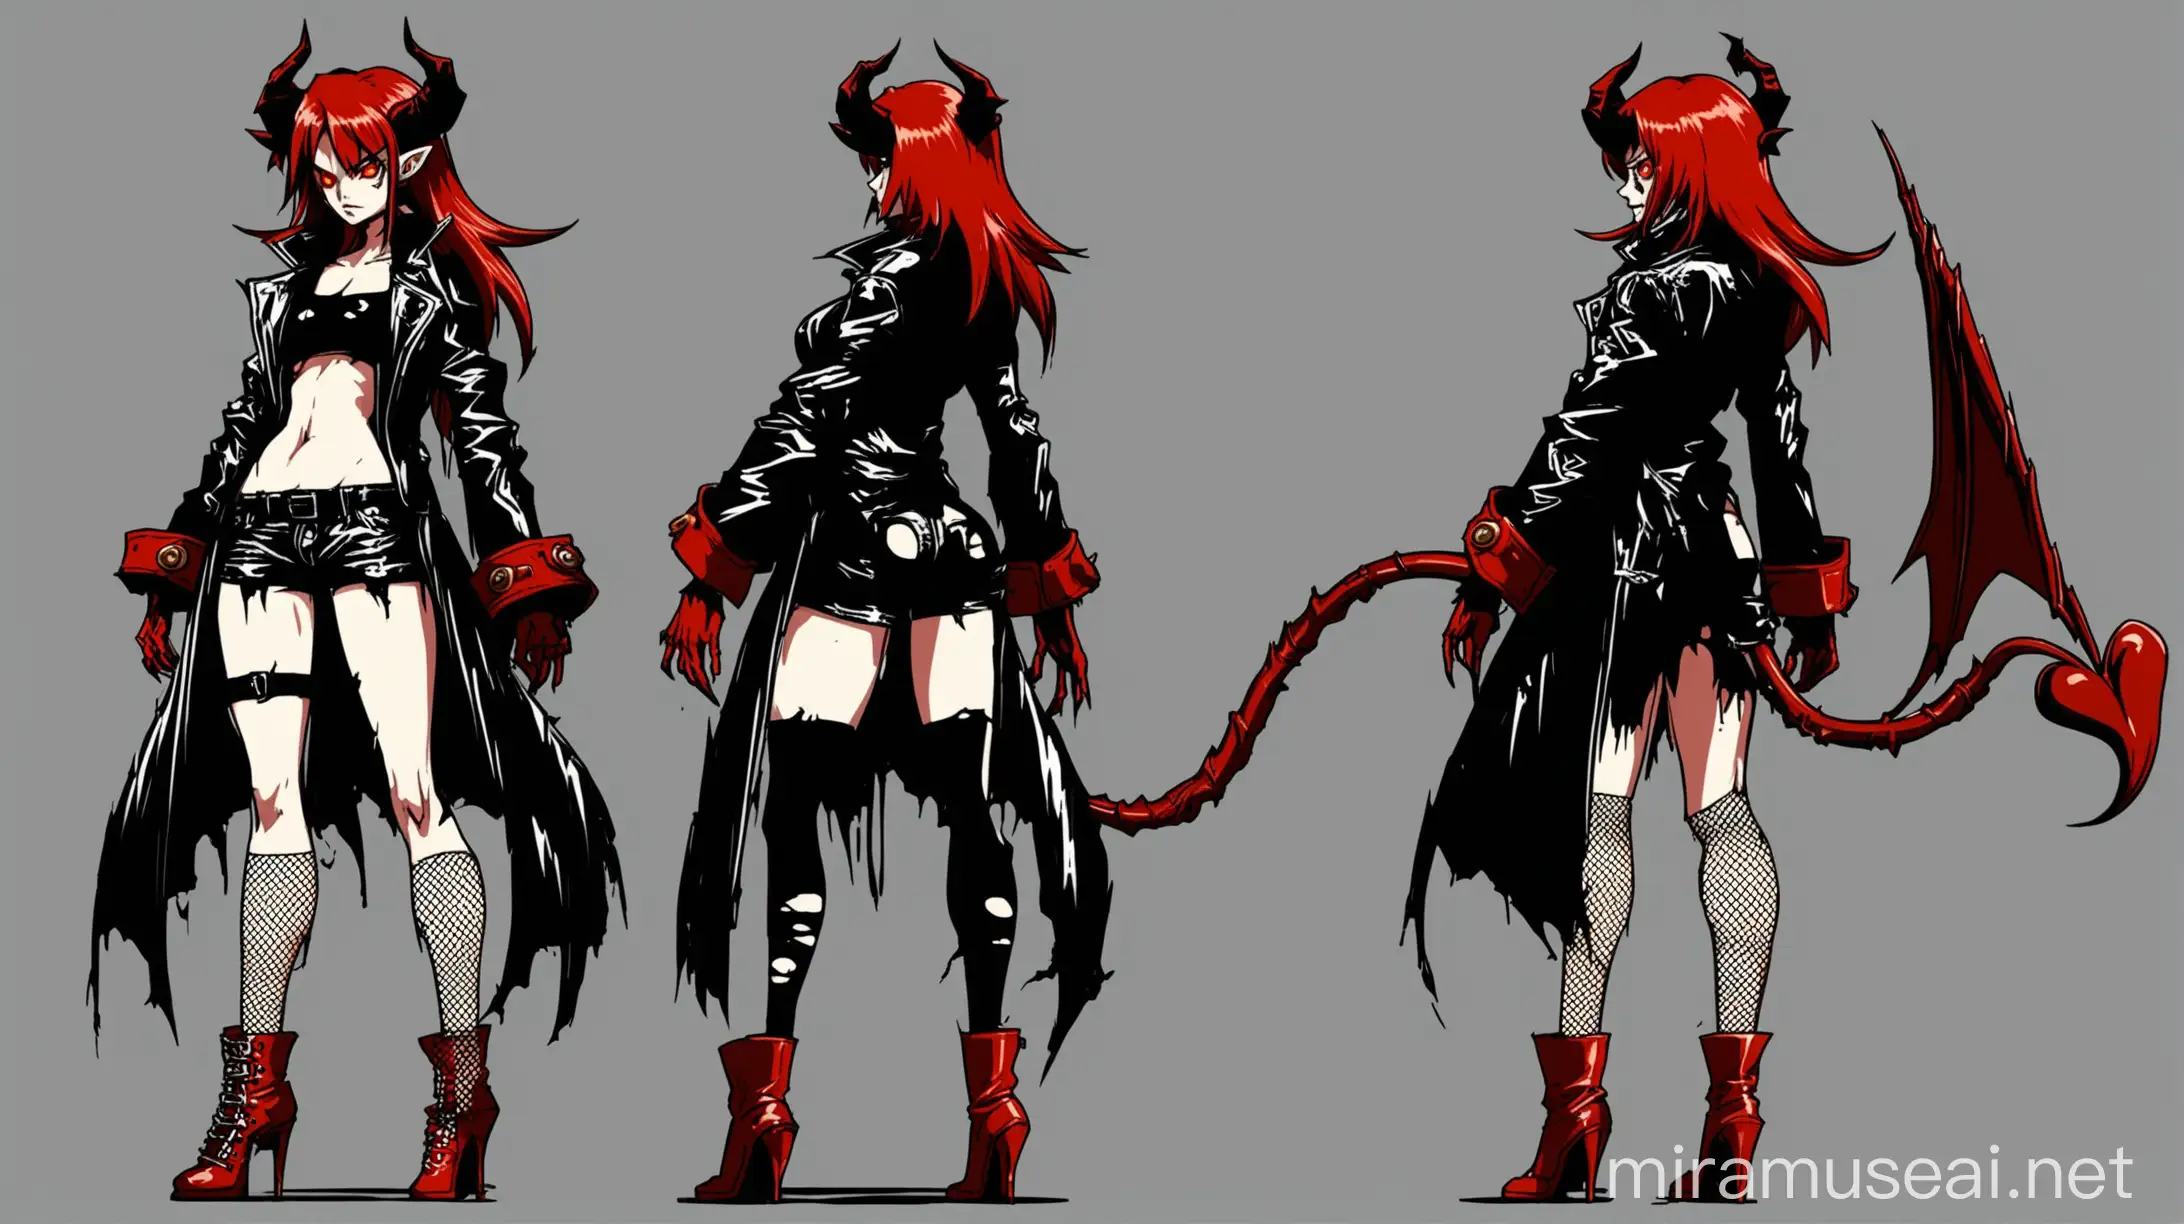 HalfDemon Girl in Black Leather Outfit Pale Skinned RedHaired Character Concept Art